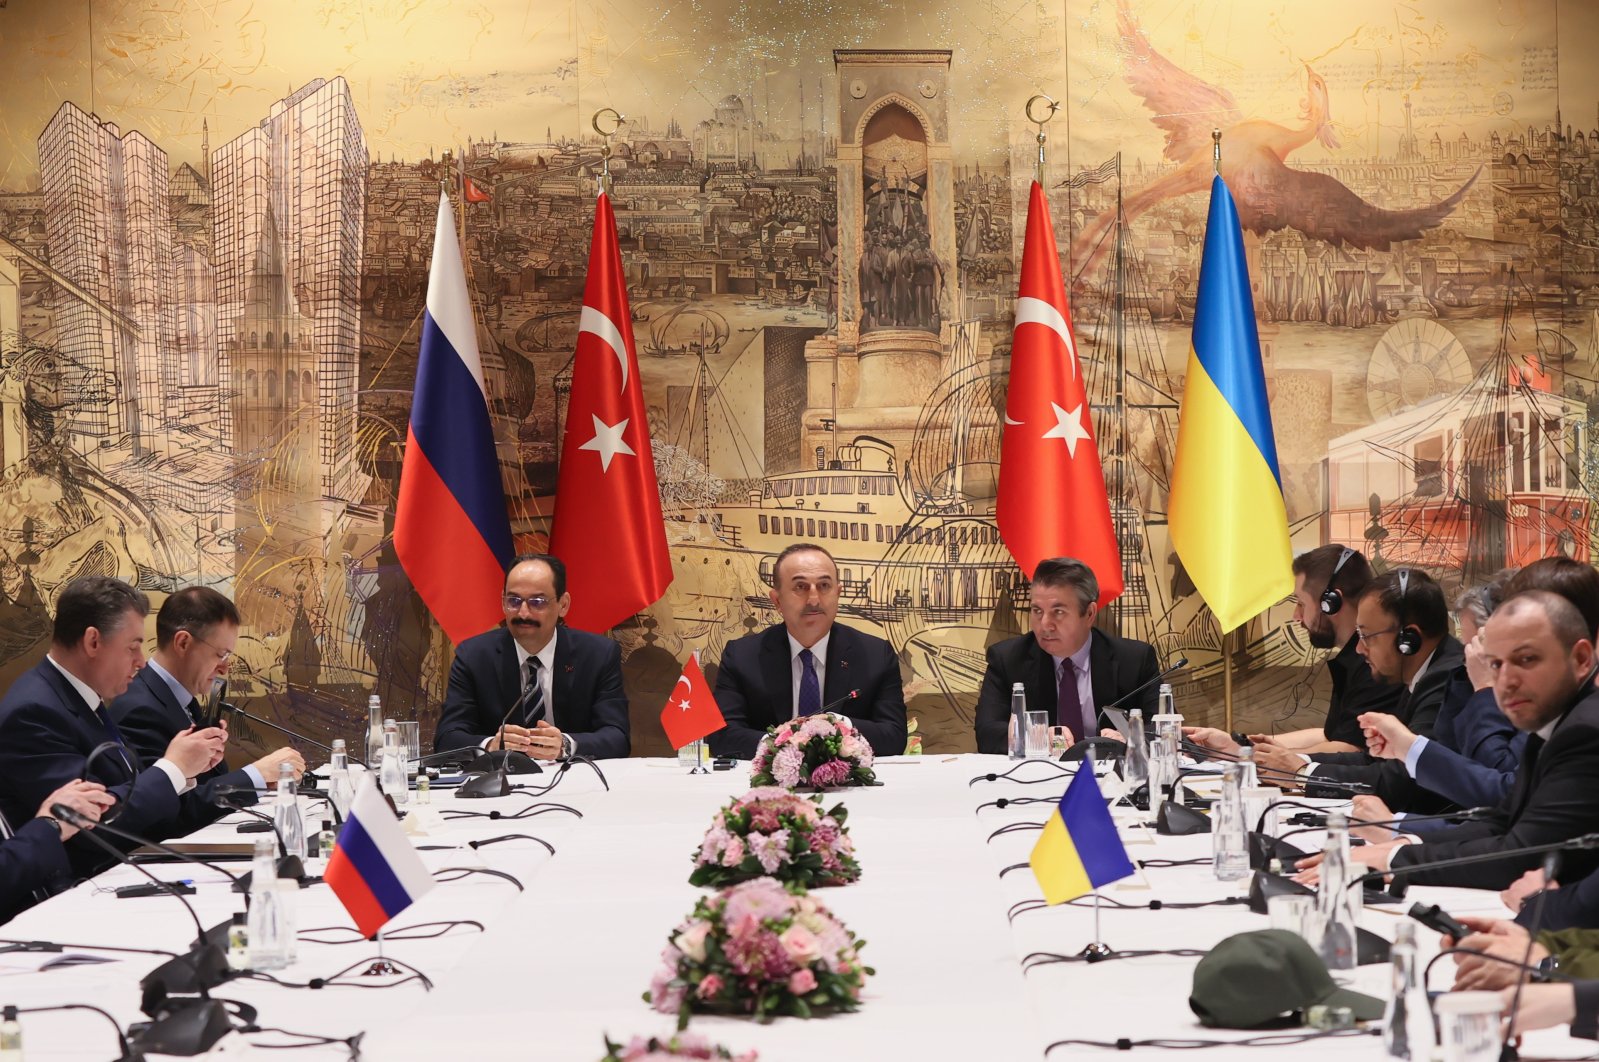 Foreign Minister Mevlüt Çavuşoğlu speaks with Russian and Ukrainian delegations after day one of peace talks ends in Istanbul, Turkey, March 29, 2022. (AA Photo)